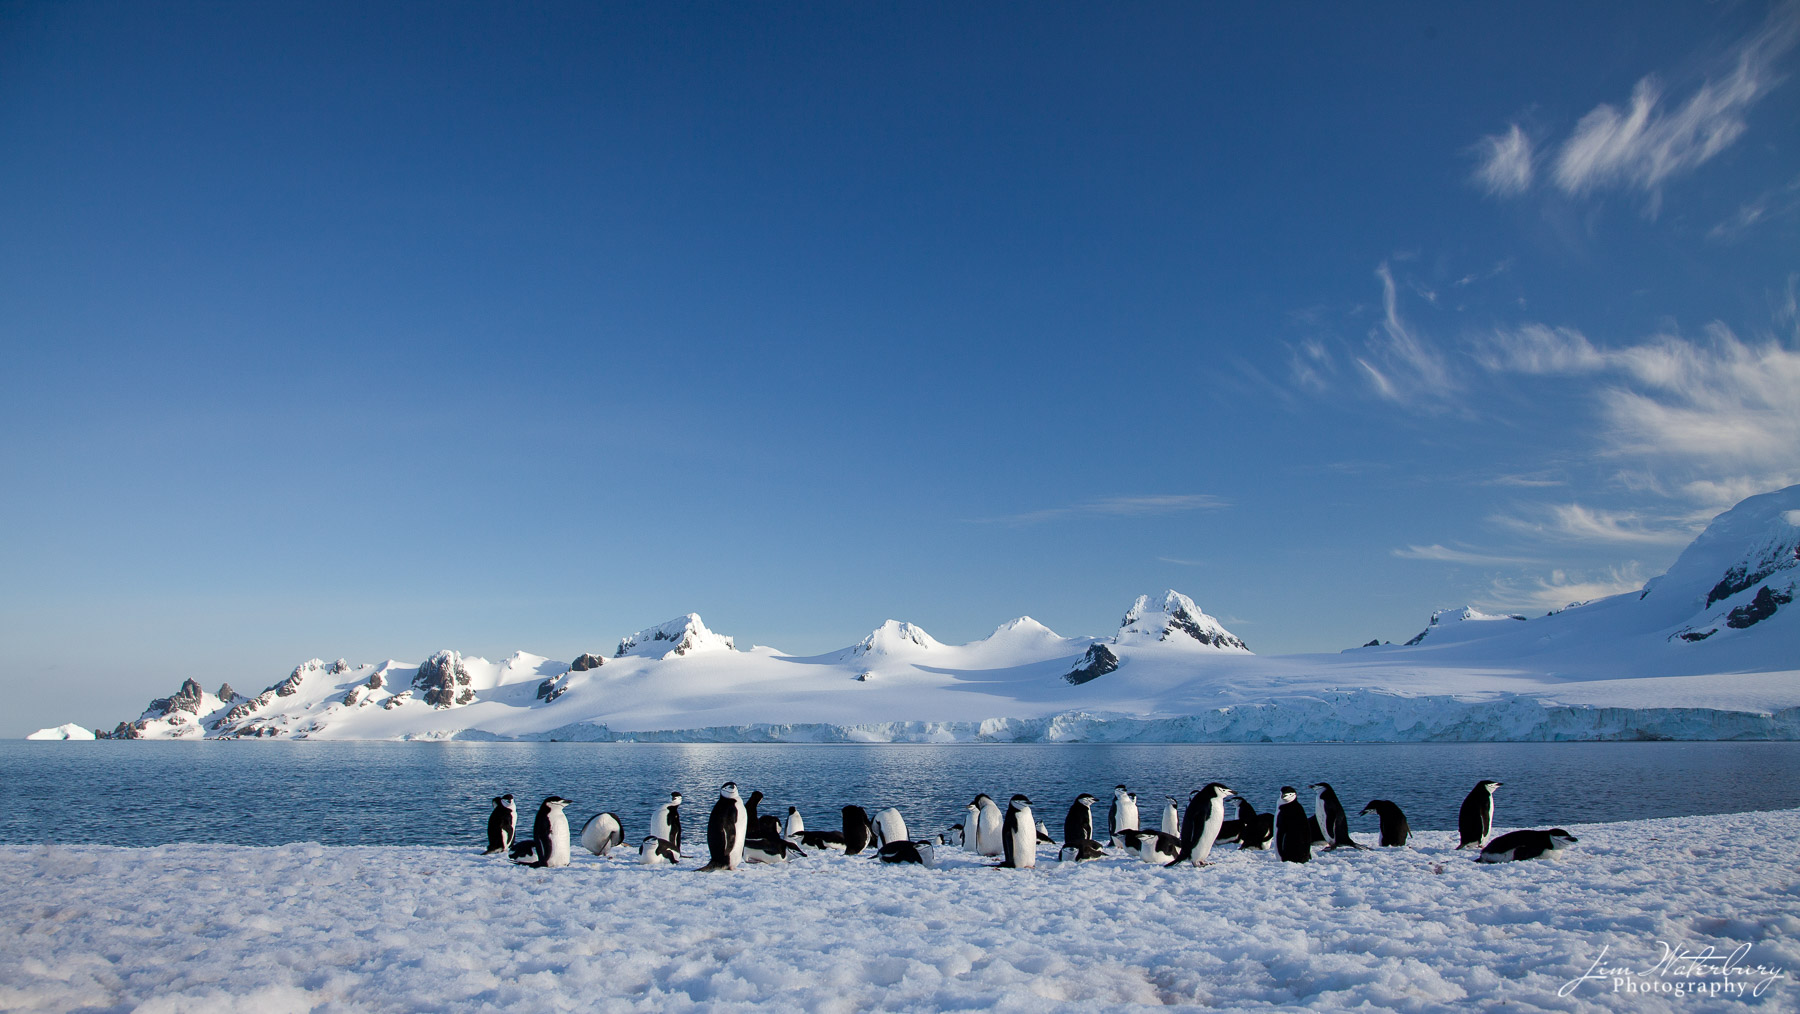 A line of chinstrap penguins gathered in the snow, with mountains in the background, on Half Moon Island, Antarctica.